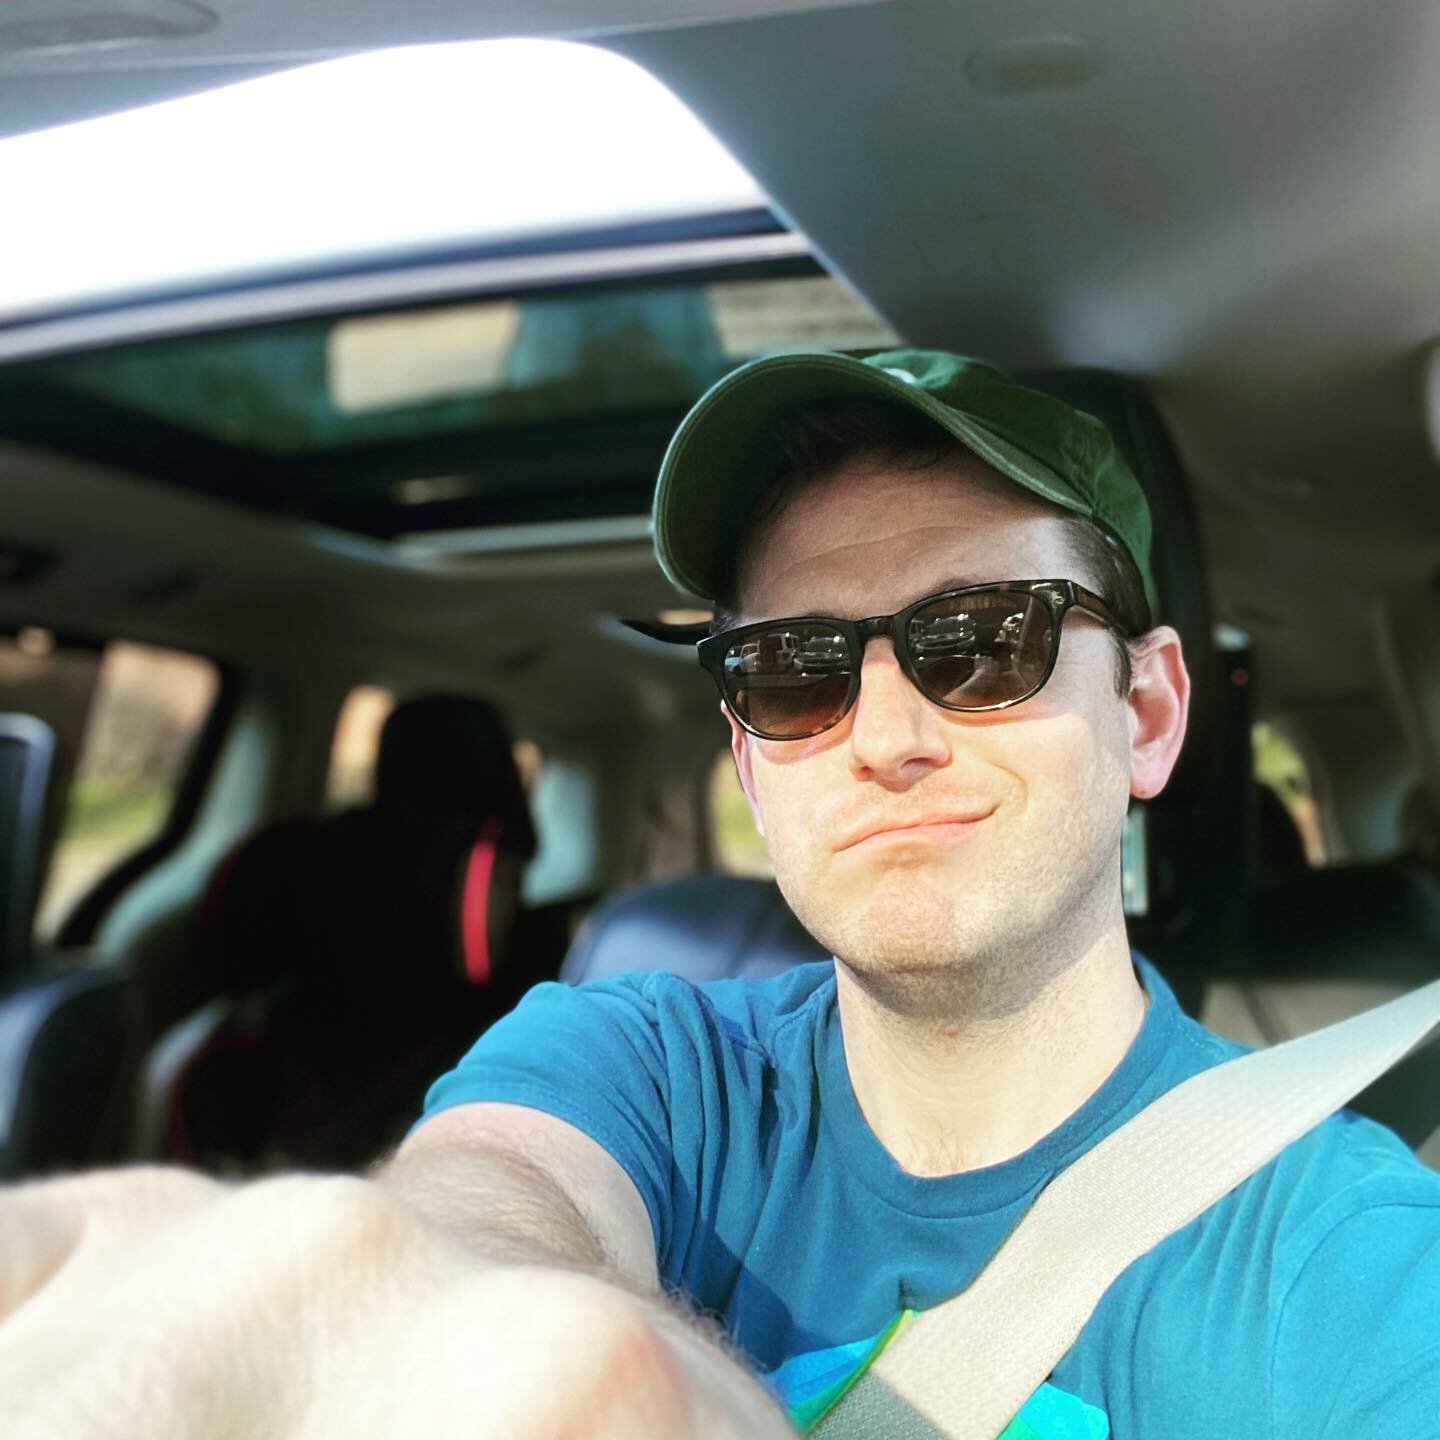 ☀️ Hello sun! Time to take the convertible (minivan with a sunroof) out for a cruise.